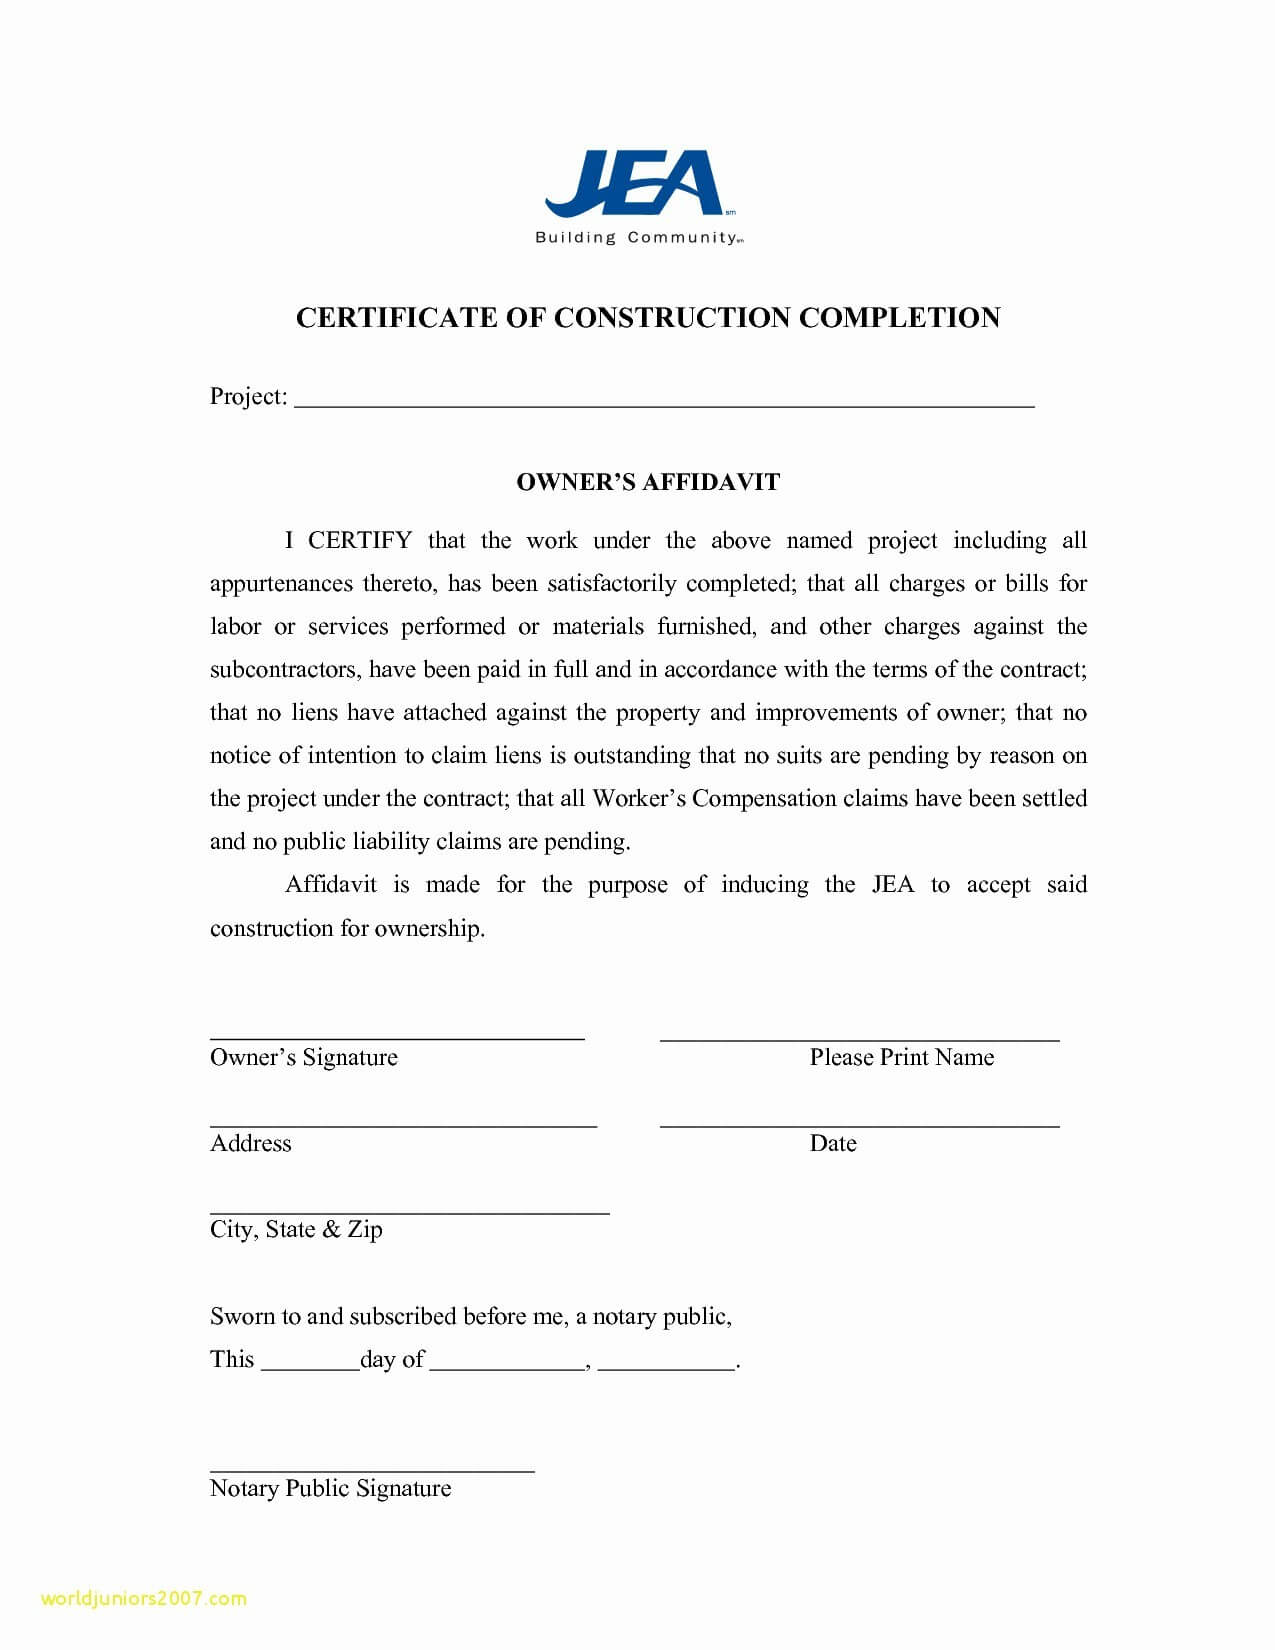 Letter Of Substantial Completion Template Examples | Letter Regarding Jct Practical Completion Certificate Template